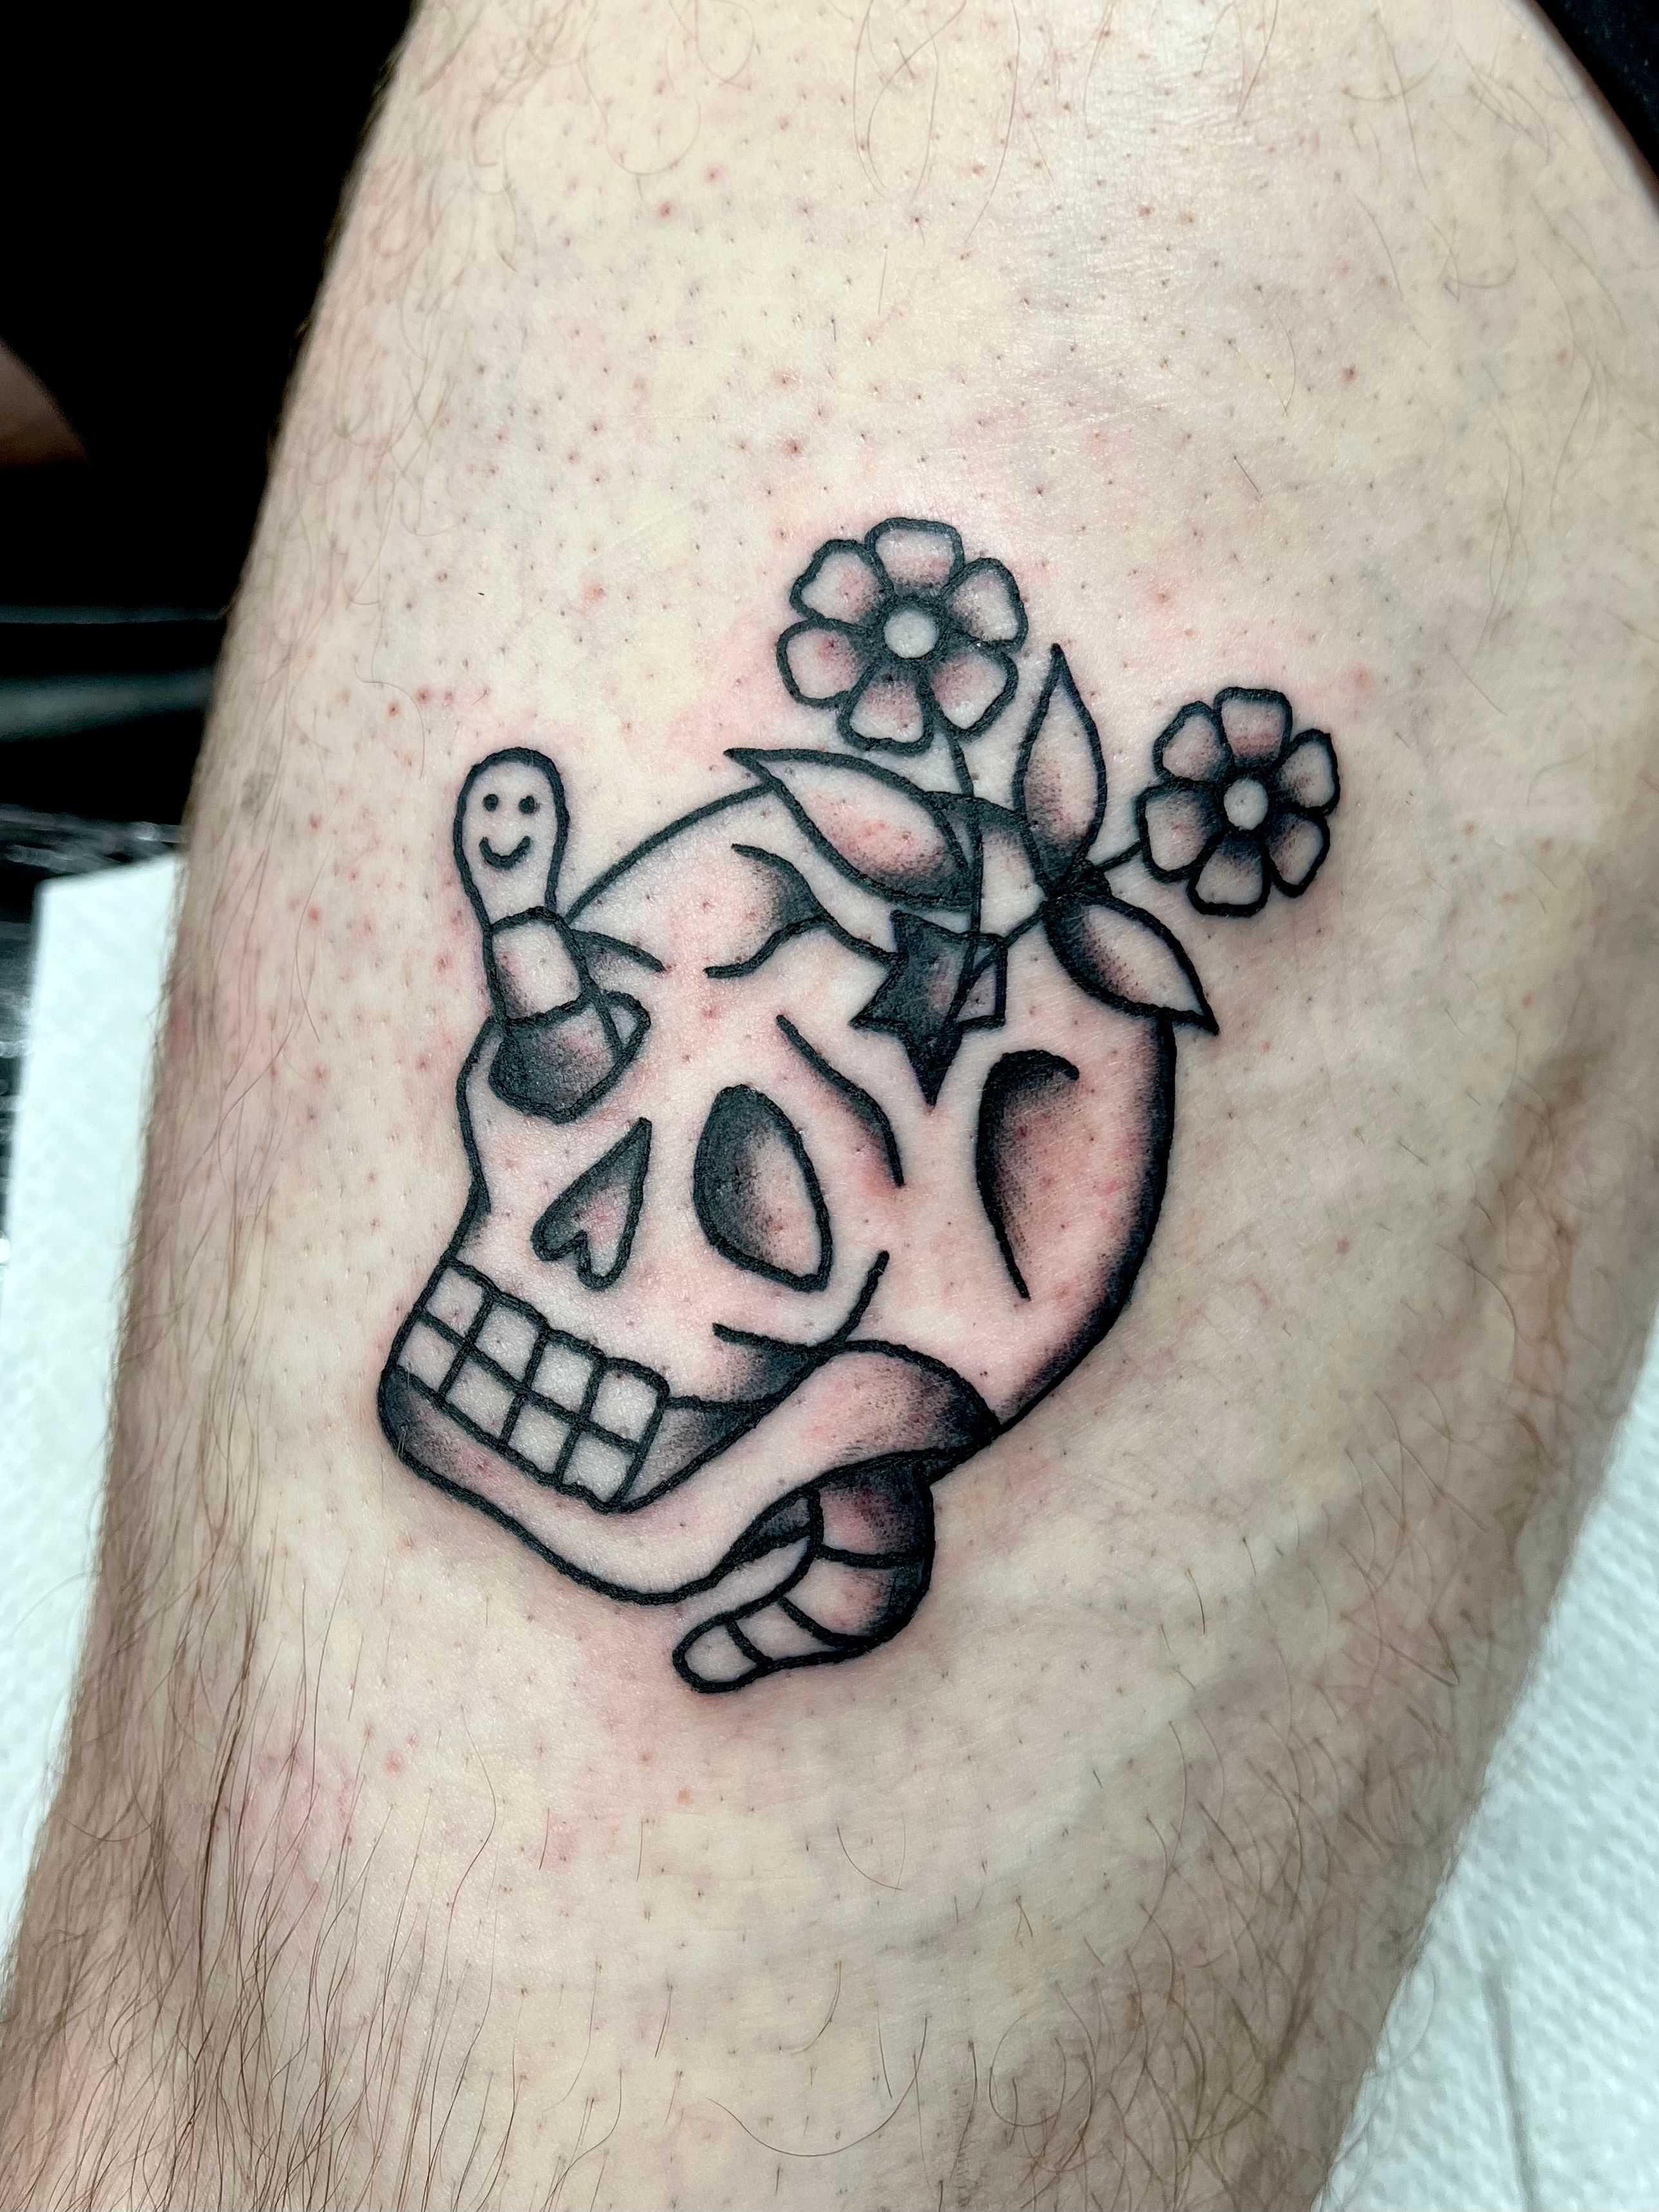 Skull Tattoos - 21 examples of this iconic imagery symbolizing mortality